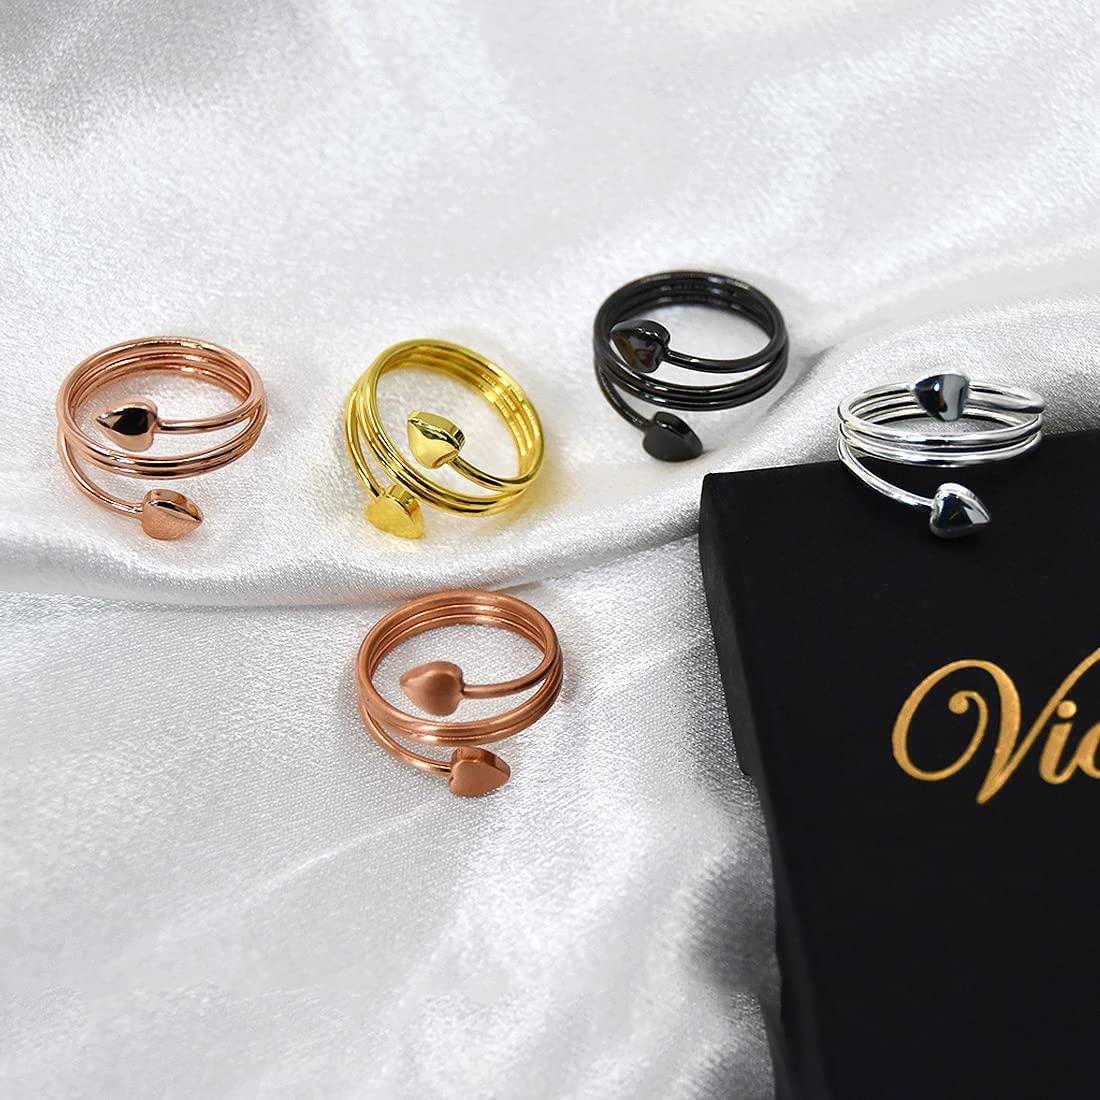 Copper Snake Ring - Consecrated | Isha Life Malaysia | Reviews on Judge.me